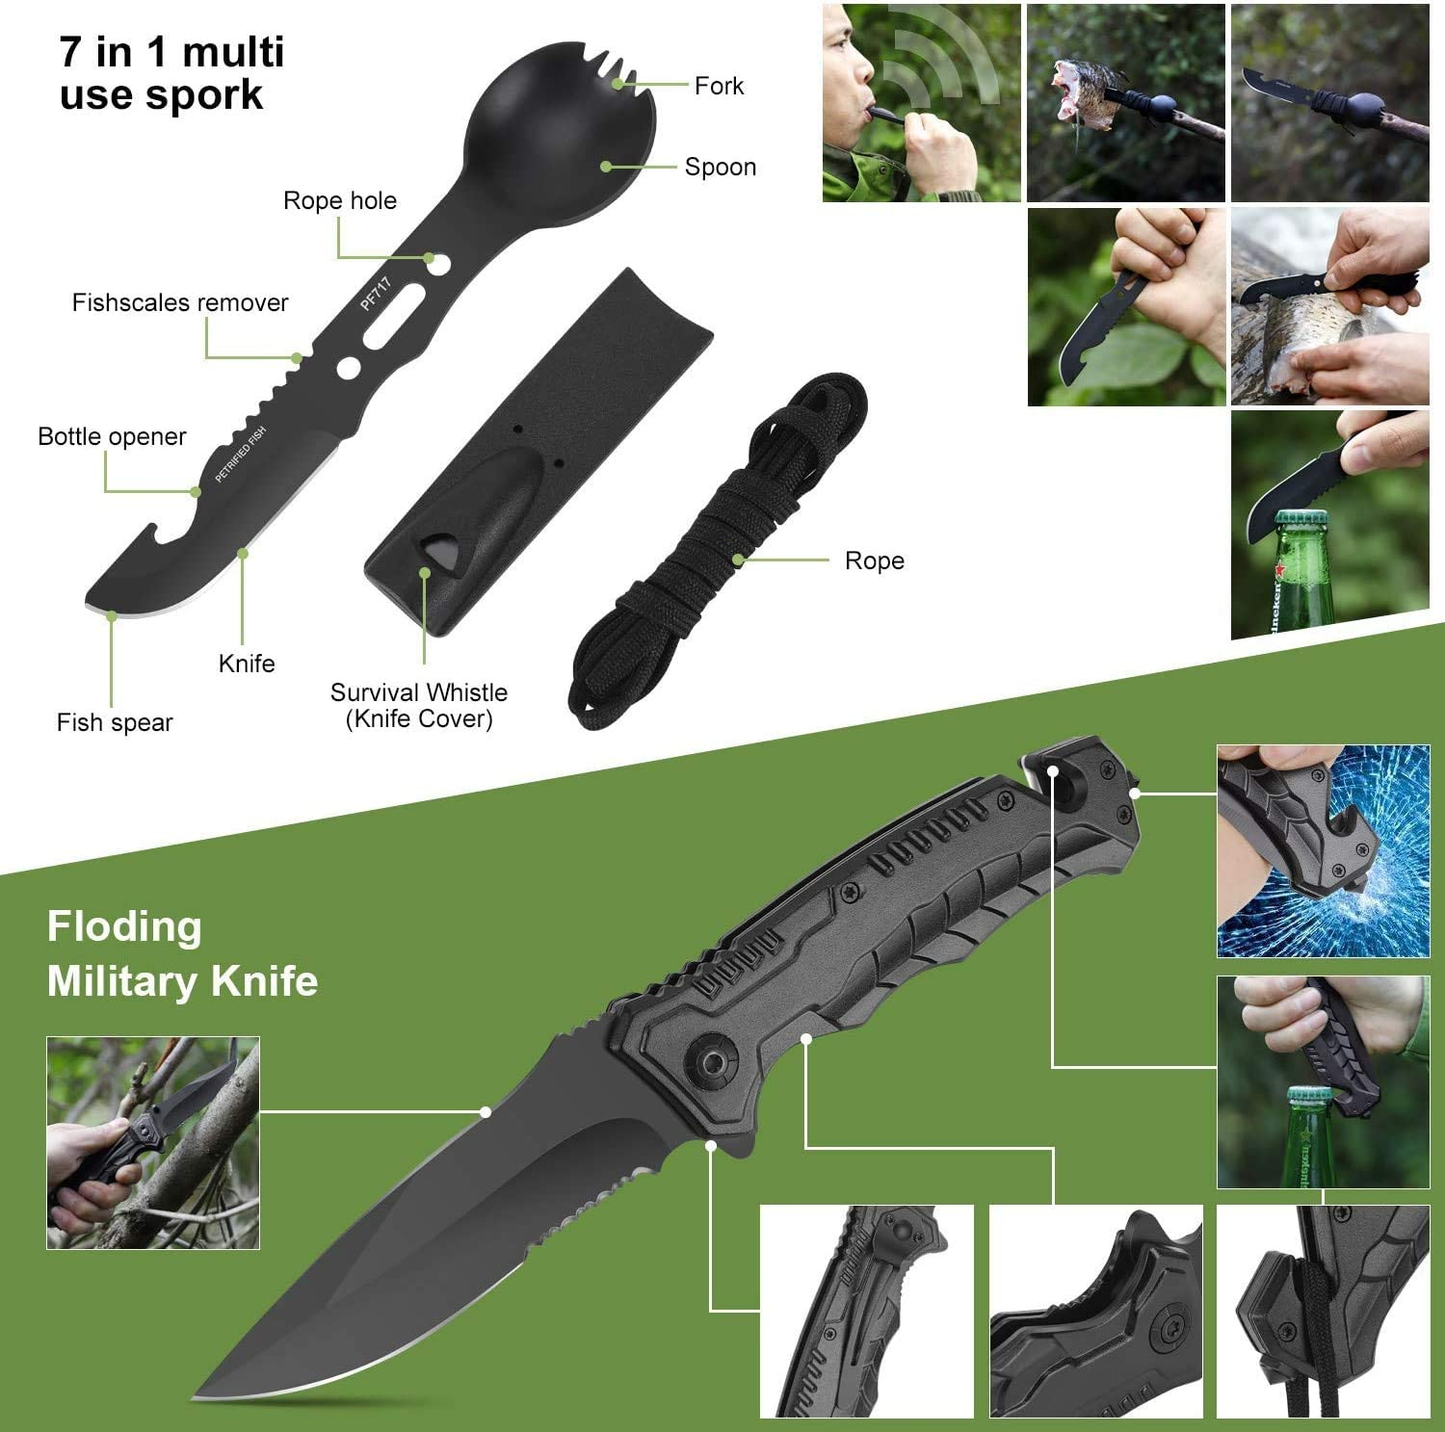 Survival Kit, 16 in 1 Professional Survival Gear Tool Emergency Tactical First Aid Equipment Supplies Kits Gifts Idear for Men Him Women Families Hiking Camping Fishing Adventures